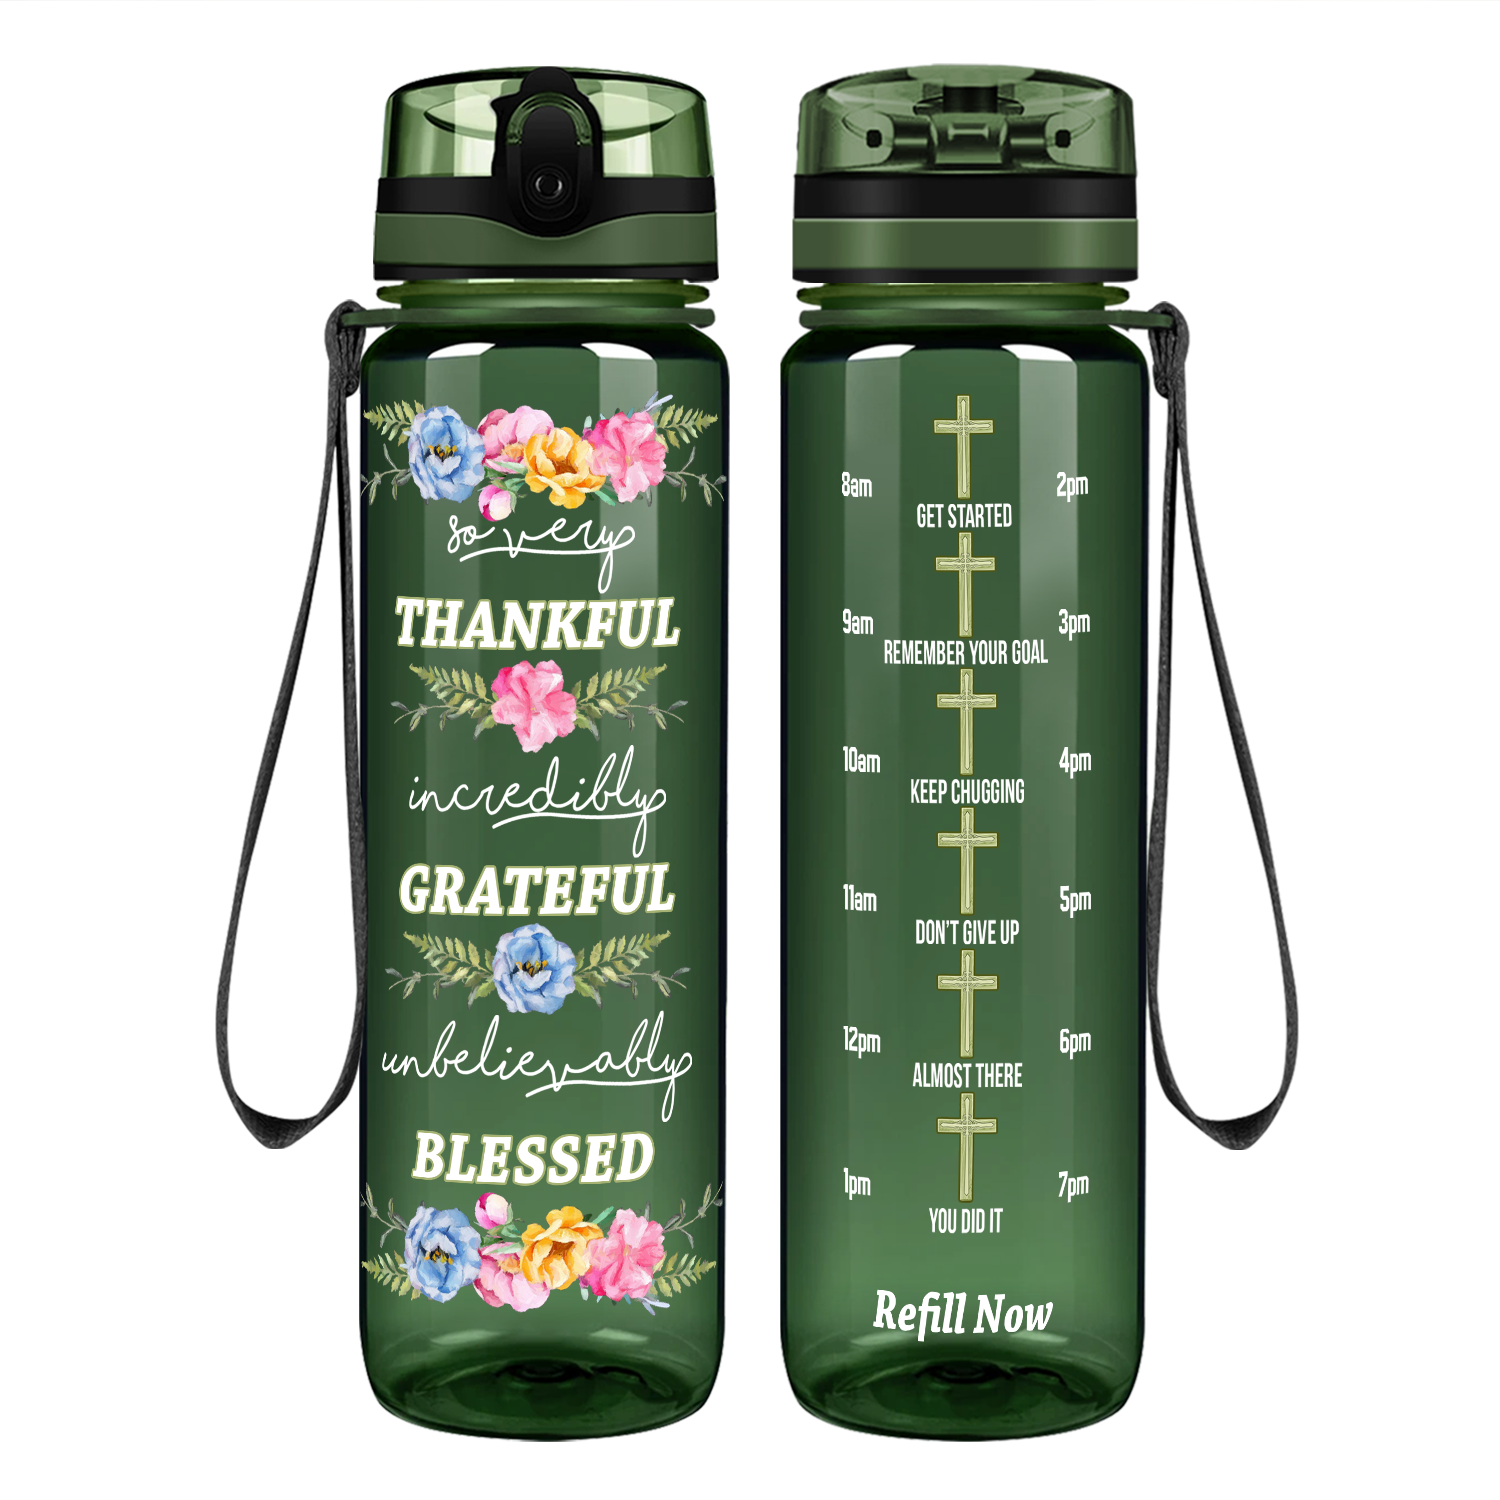 Thankful Grateful Blessed Motivational Tracking Water Bottle